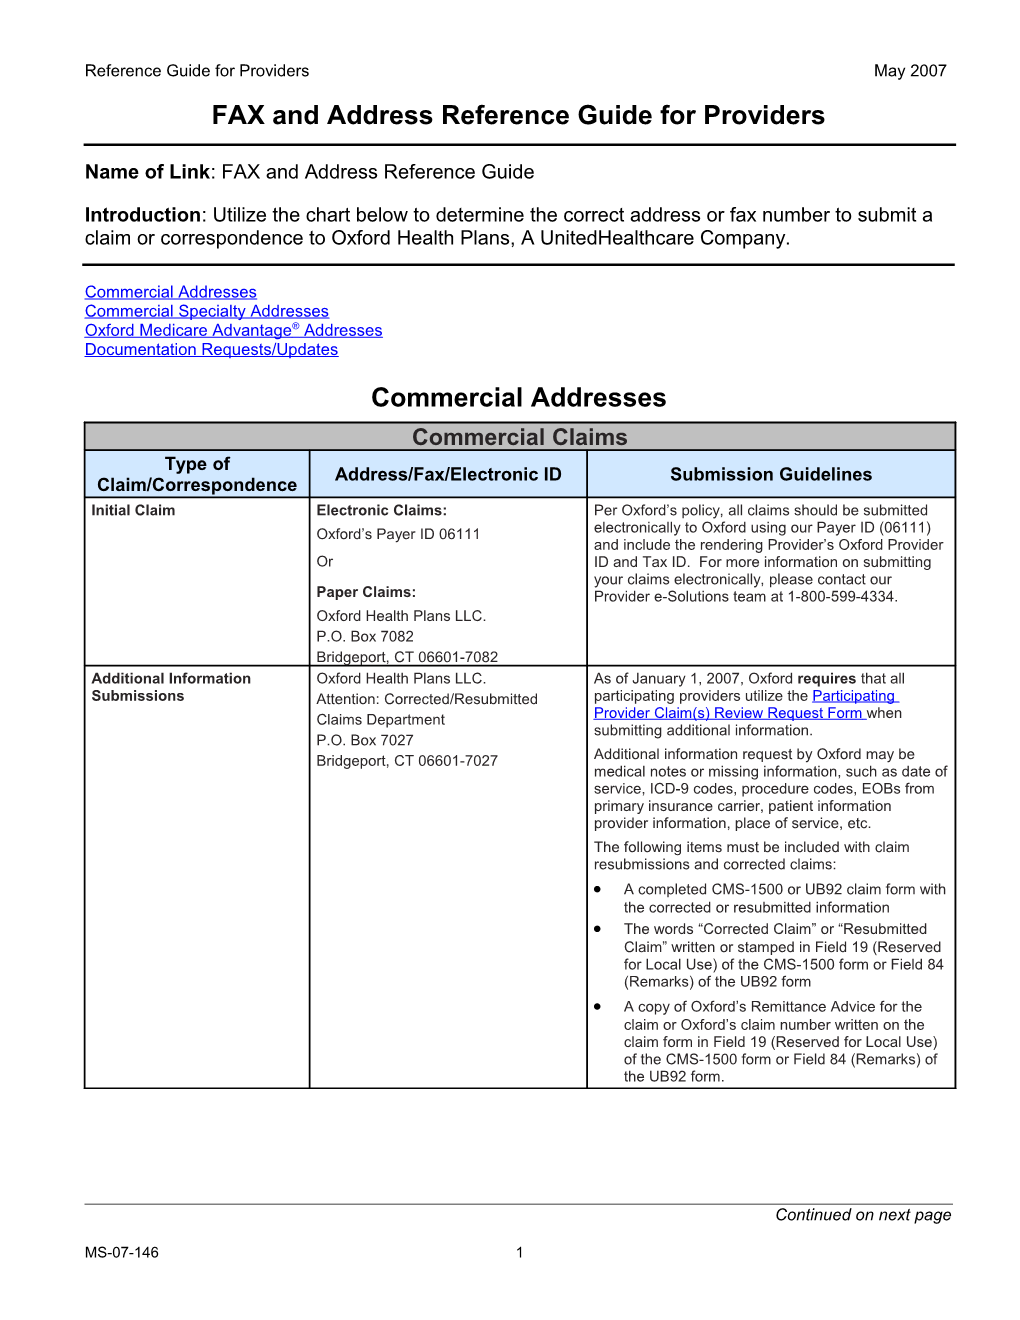 FAX And Address Reference Guide For Providers